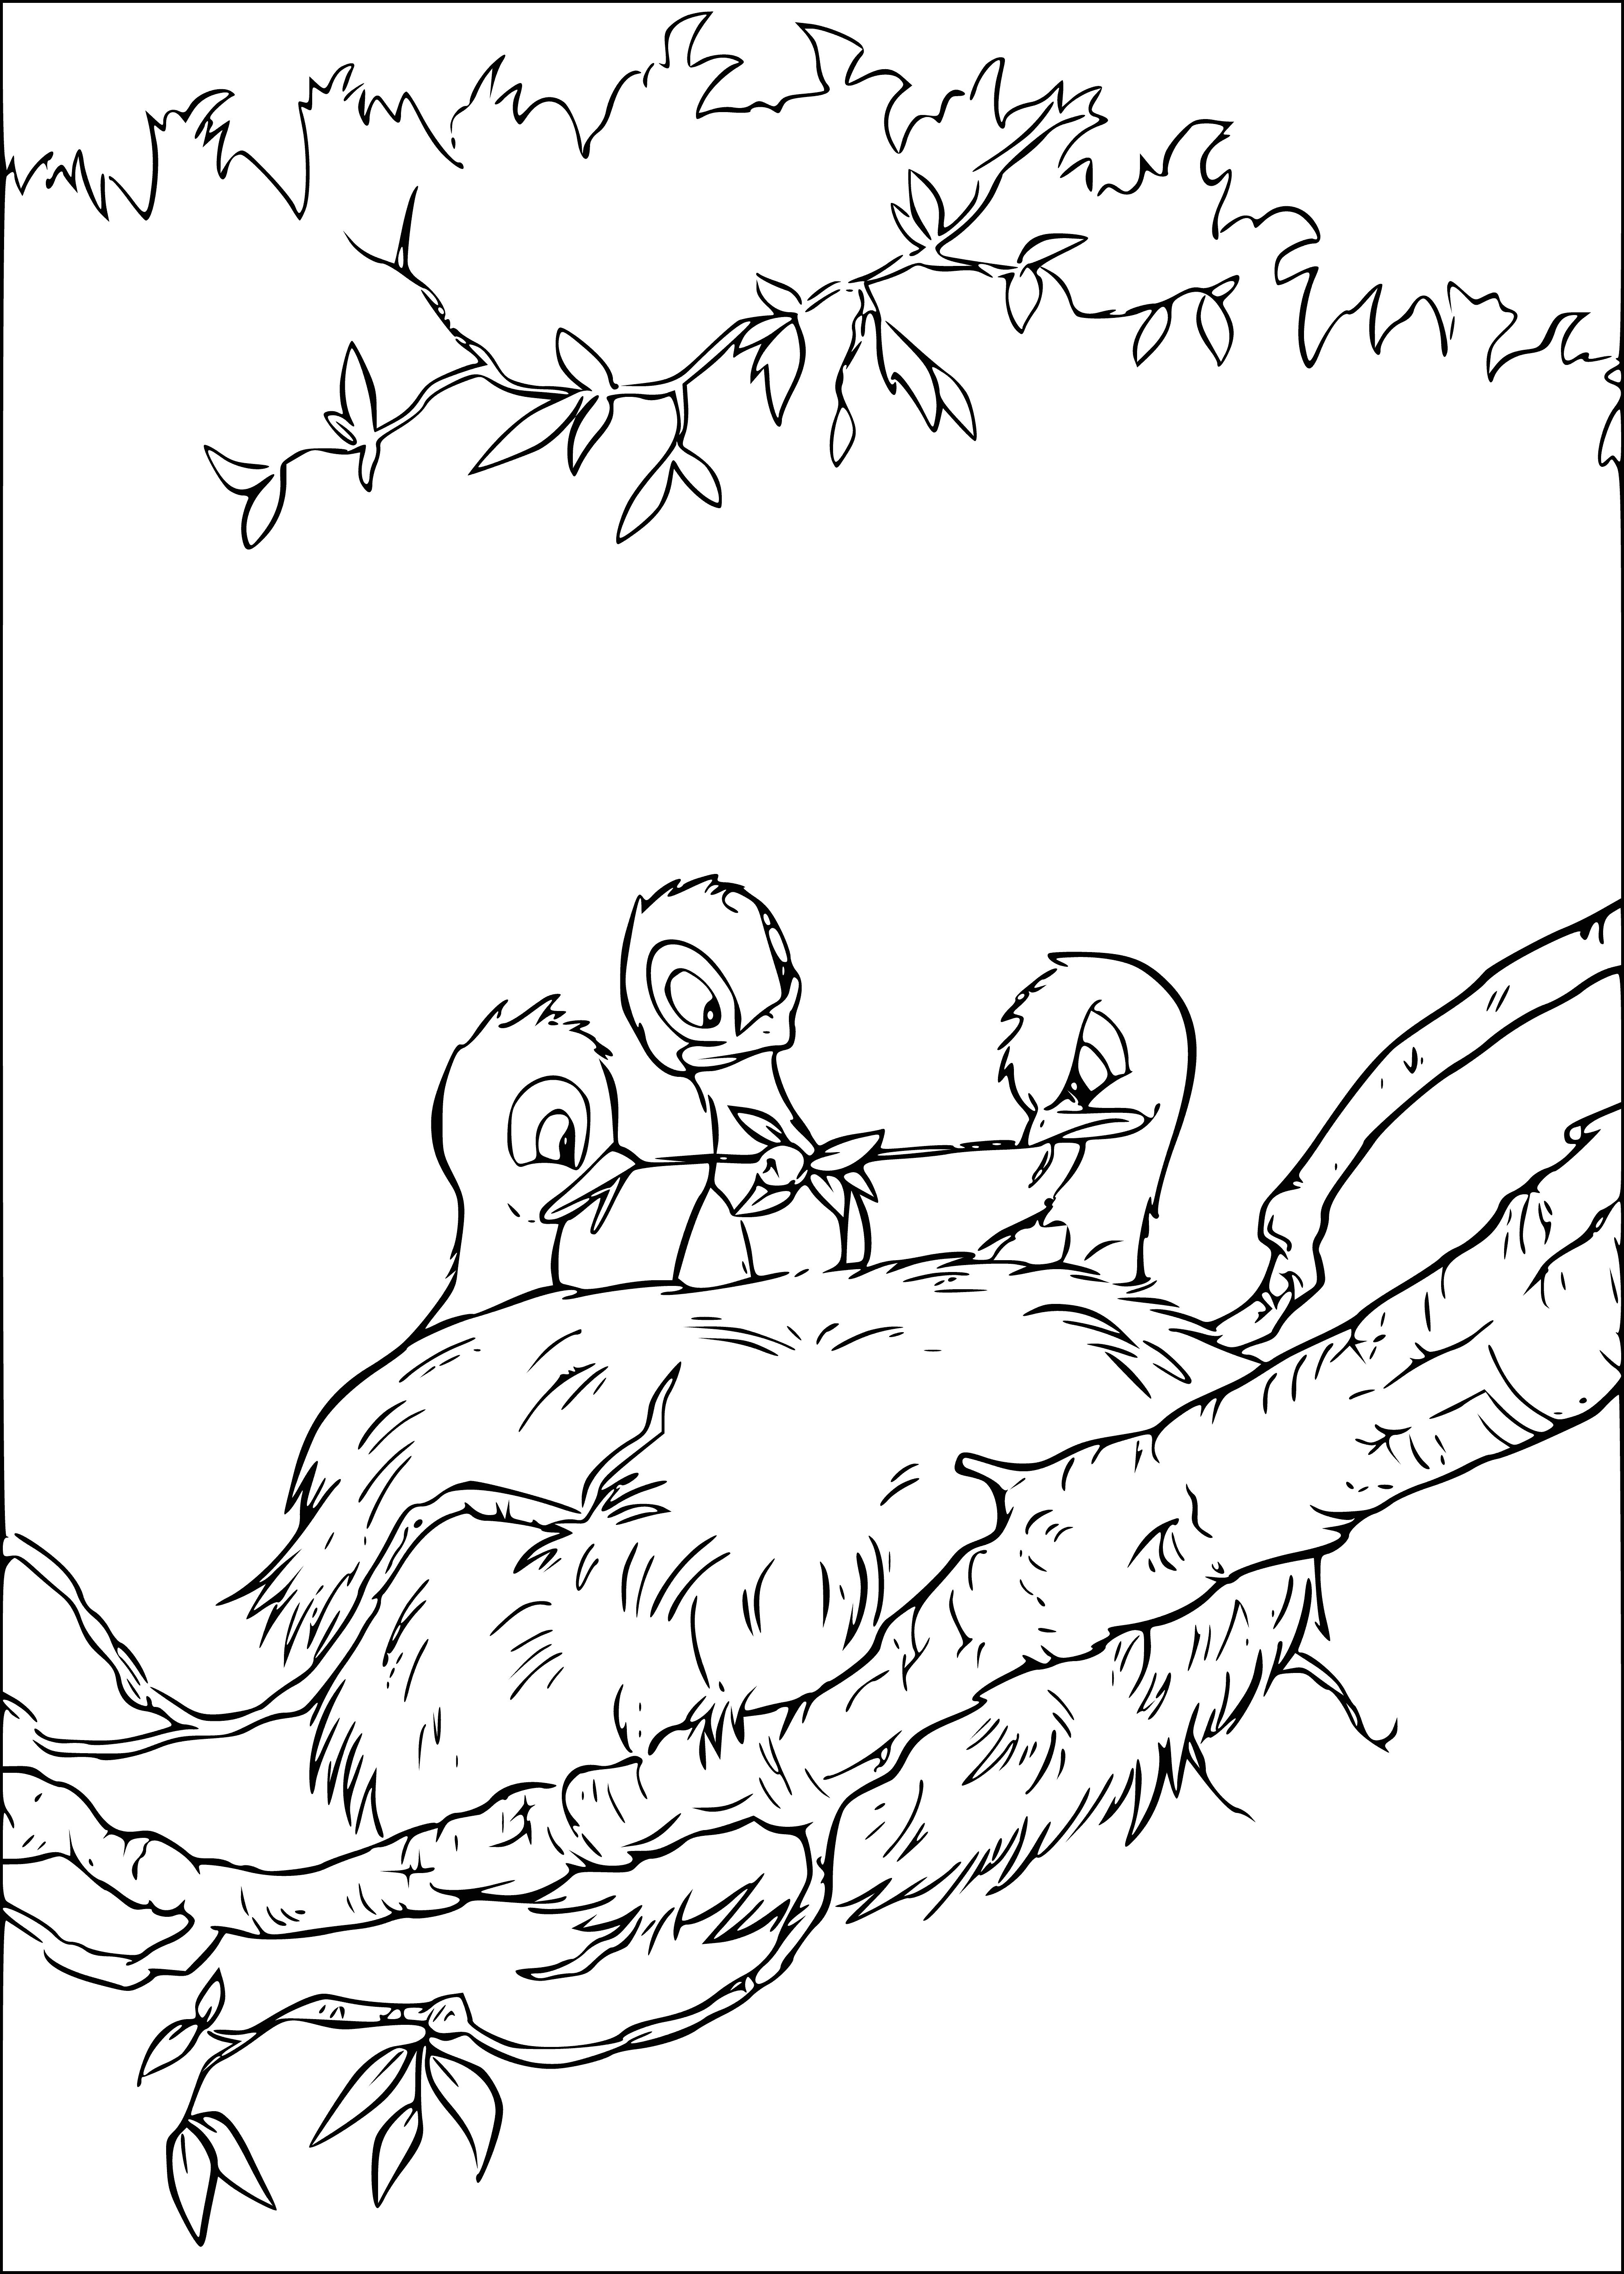 Nest with chicks coloring page